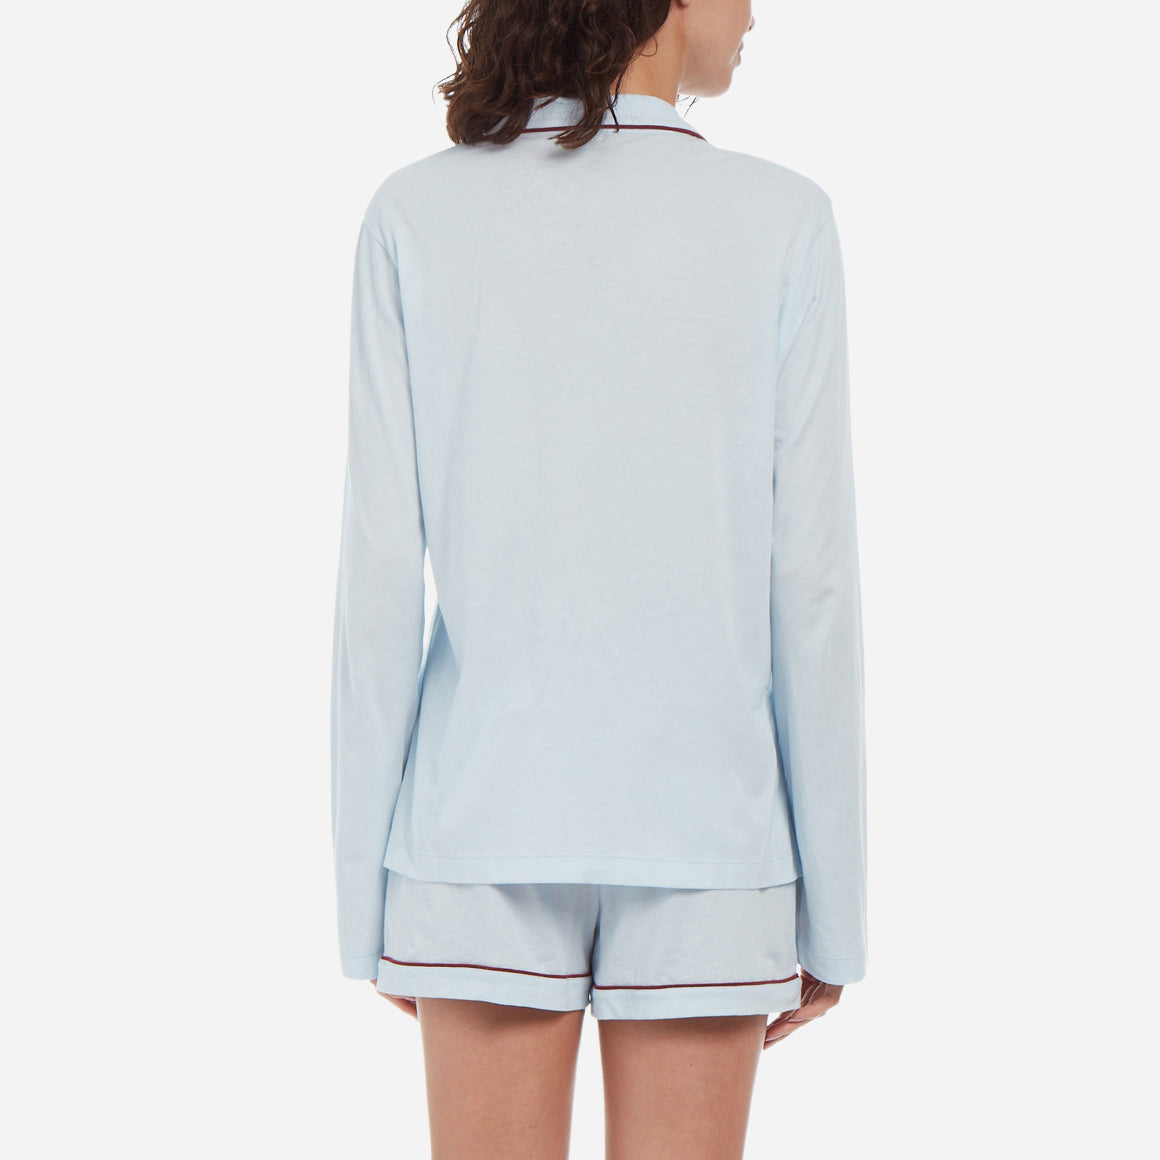  Back facing female model wearing long sleeve light blue pajama top with deep red piping with matching shorts.